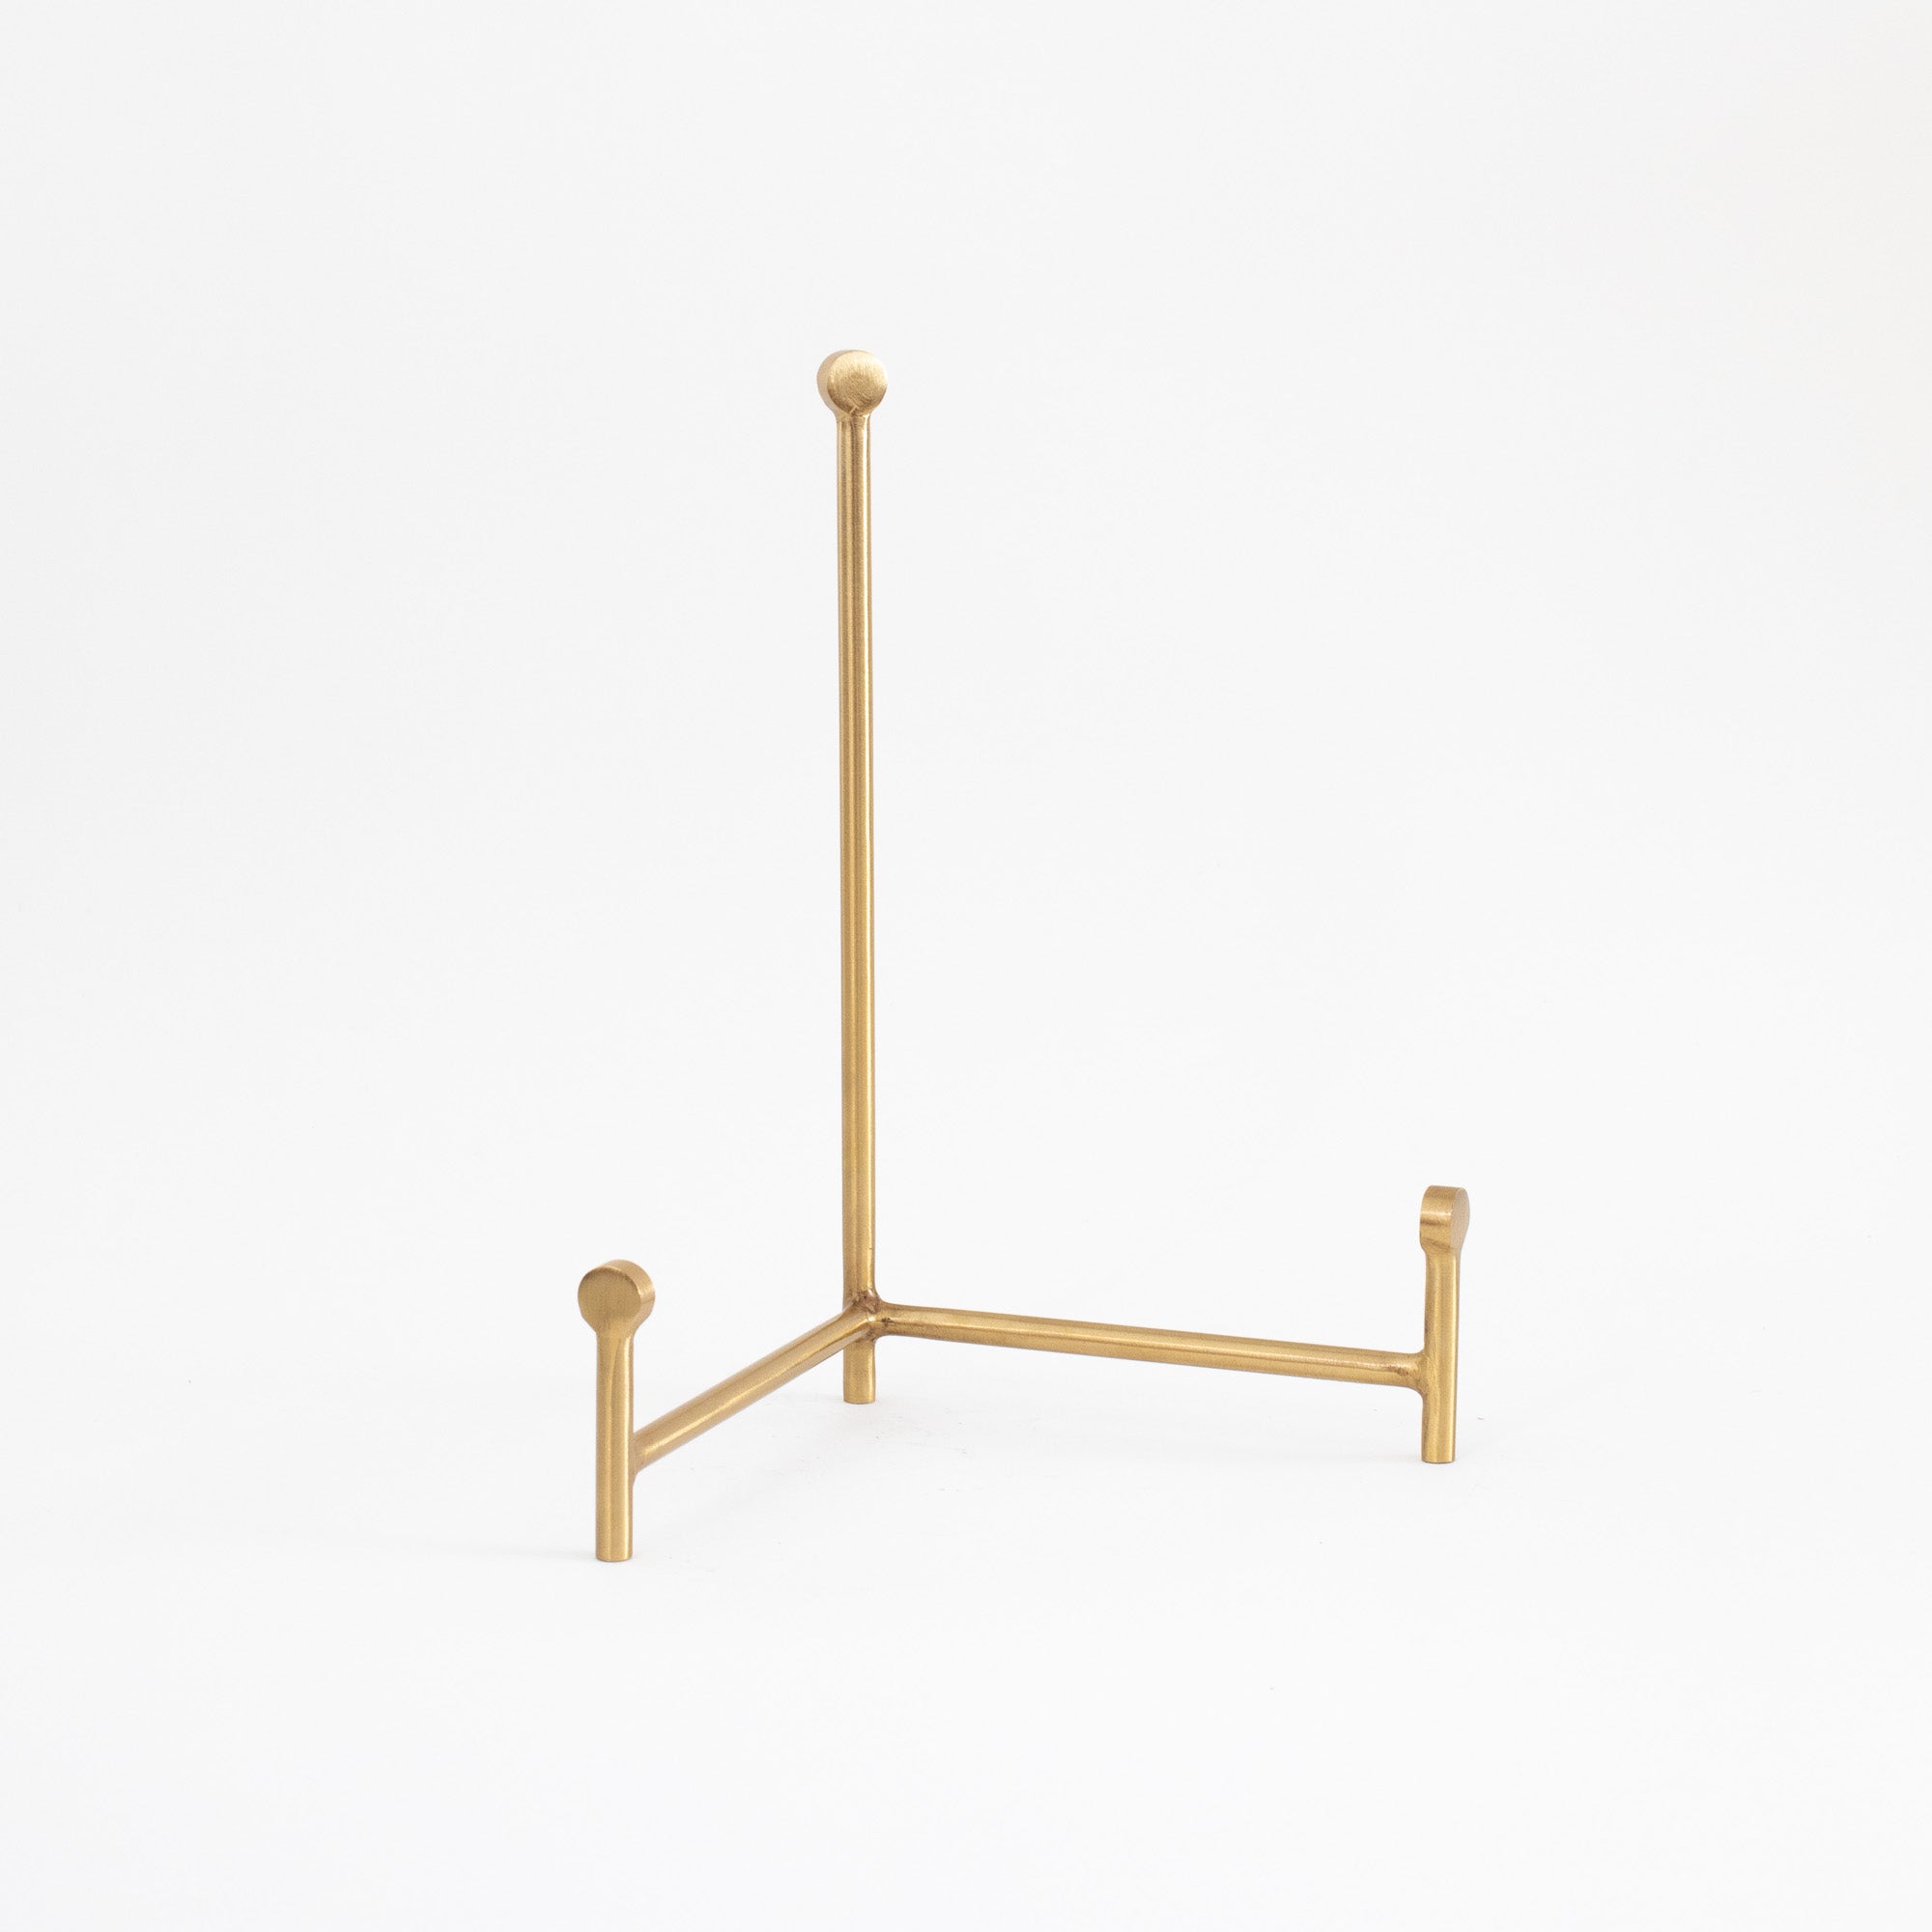 Brass Picture Frame Easel